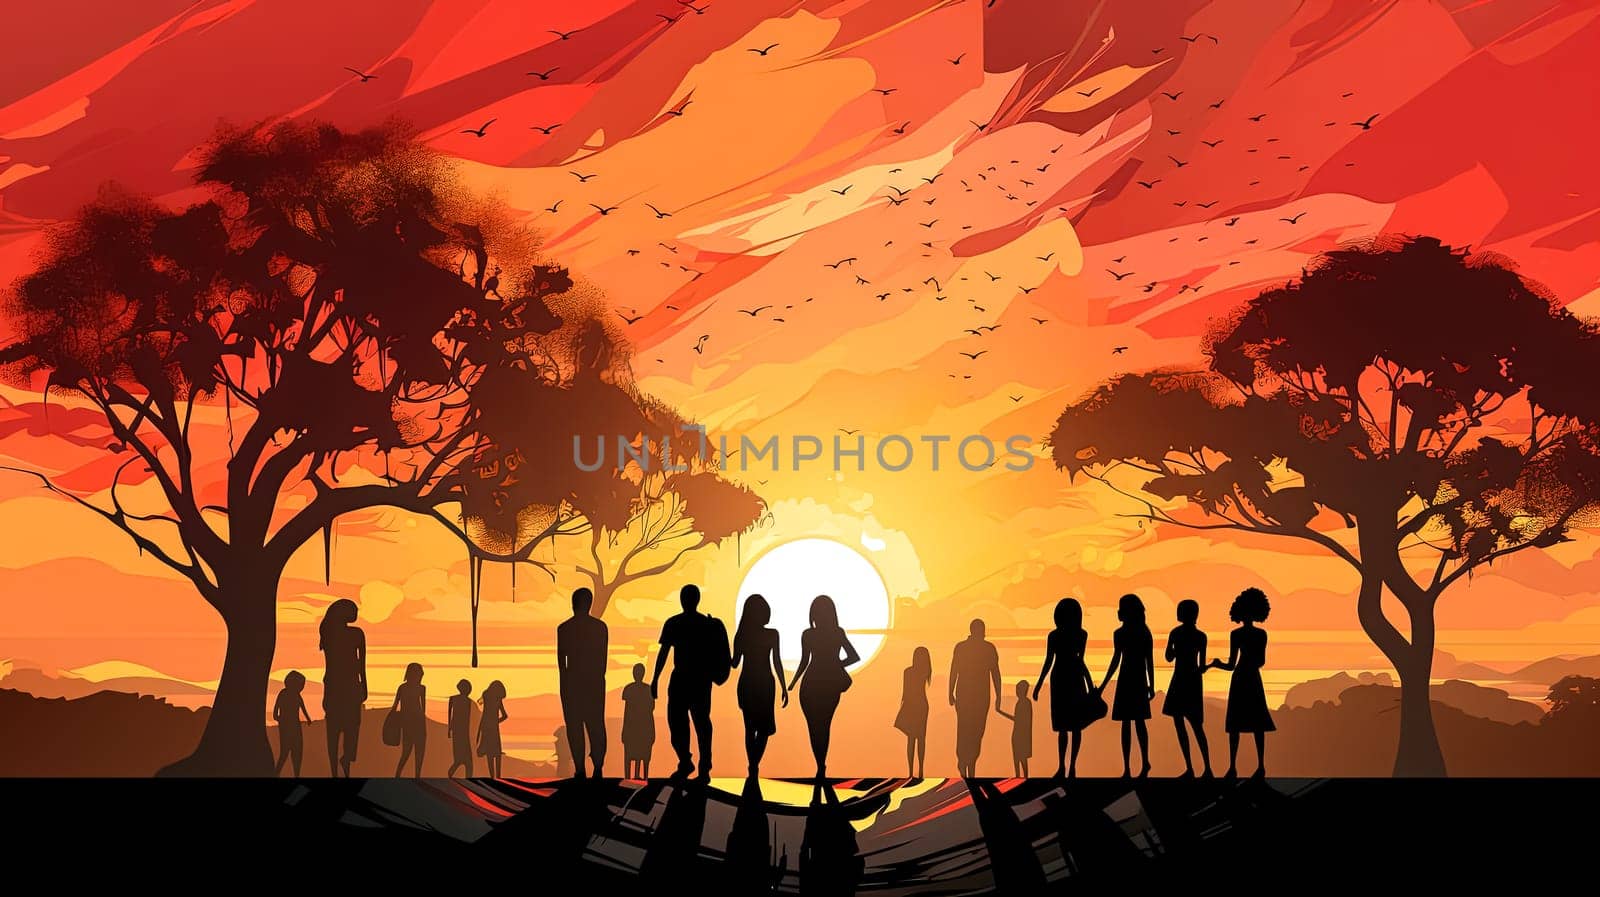 Celebrate love with a Valentines Day illustration featuring silhouettes of people and heart symbols, capturing the essence of romance and affection.